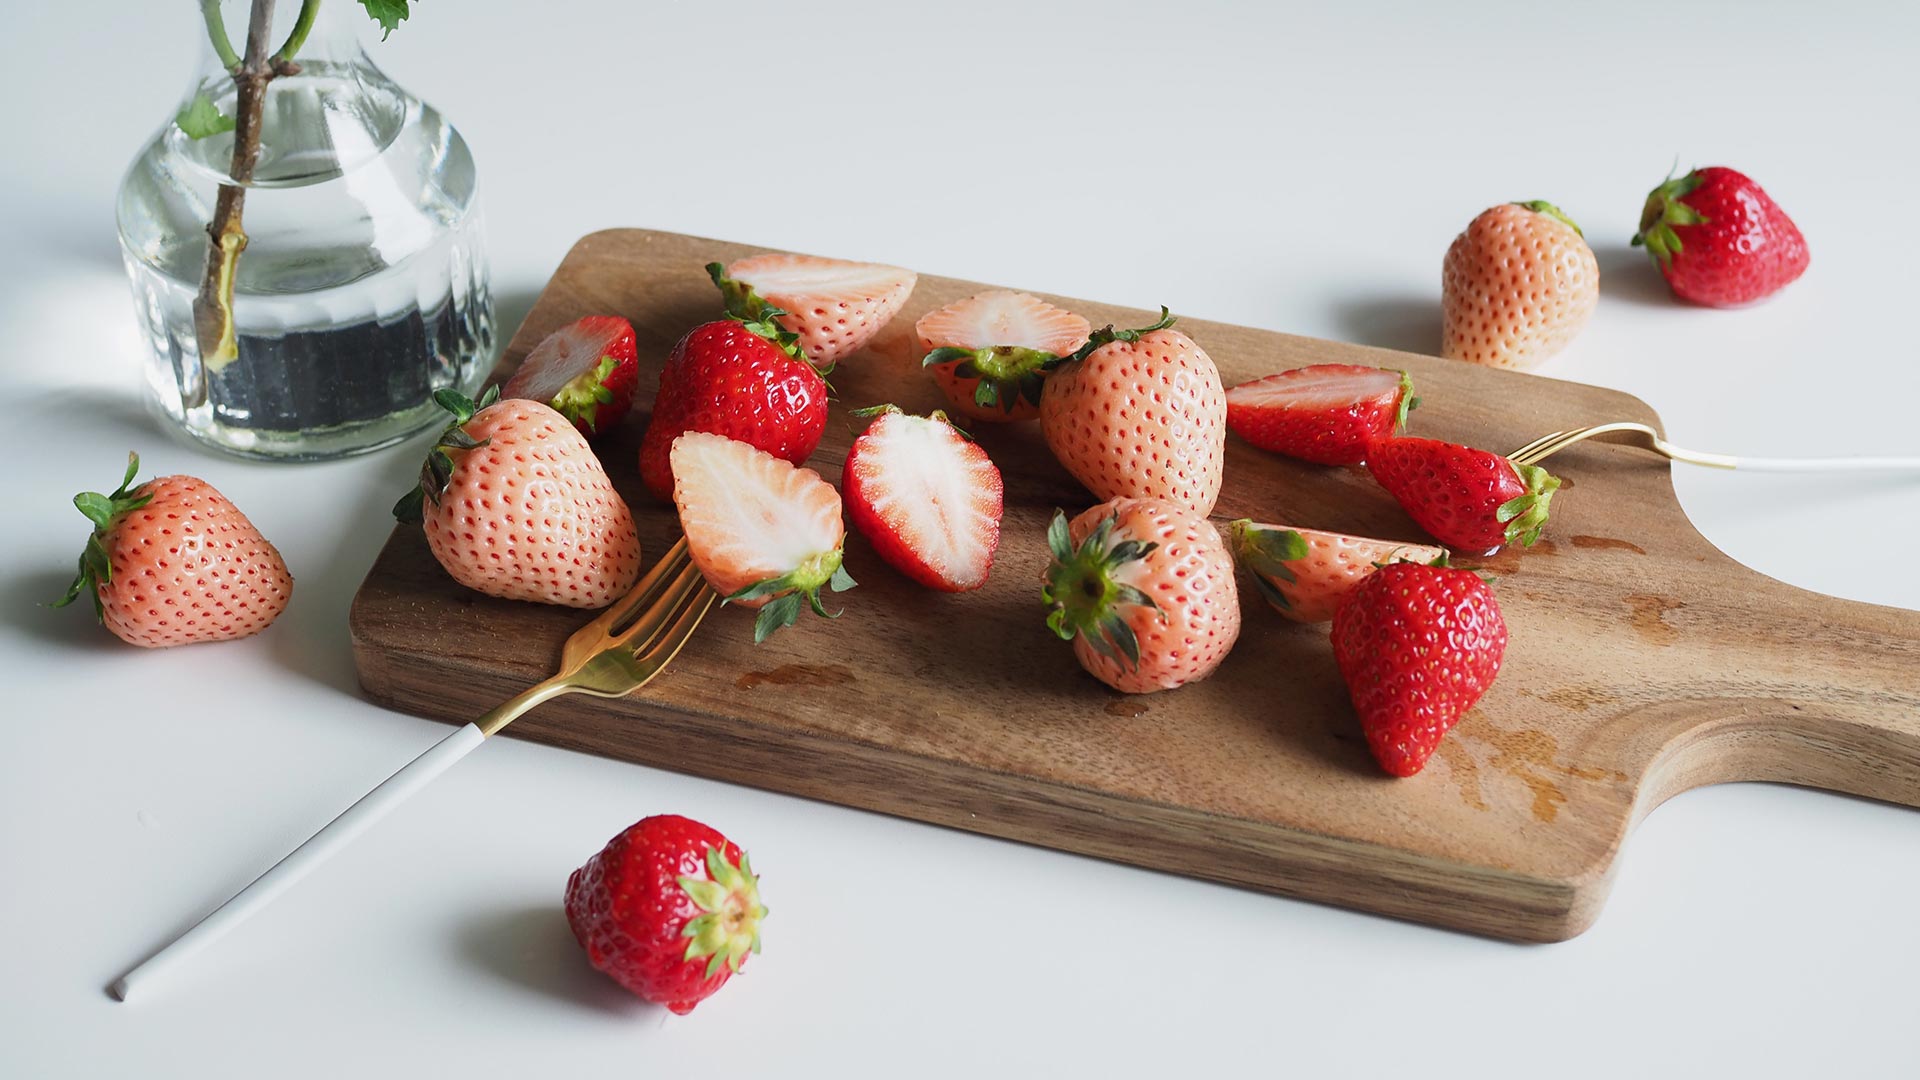 Strawberries are considered Winter Fruits in Japan